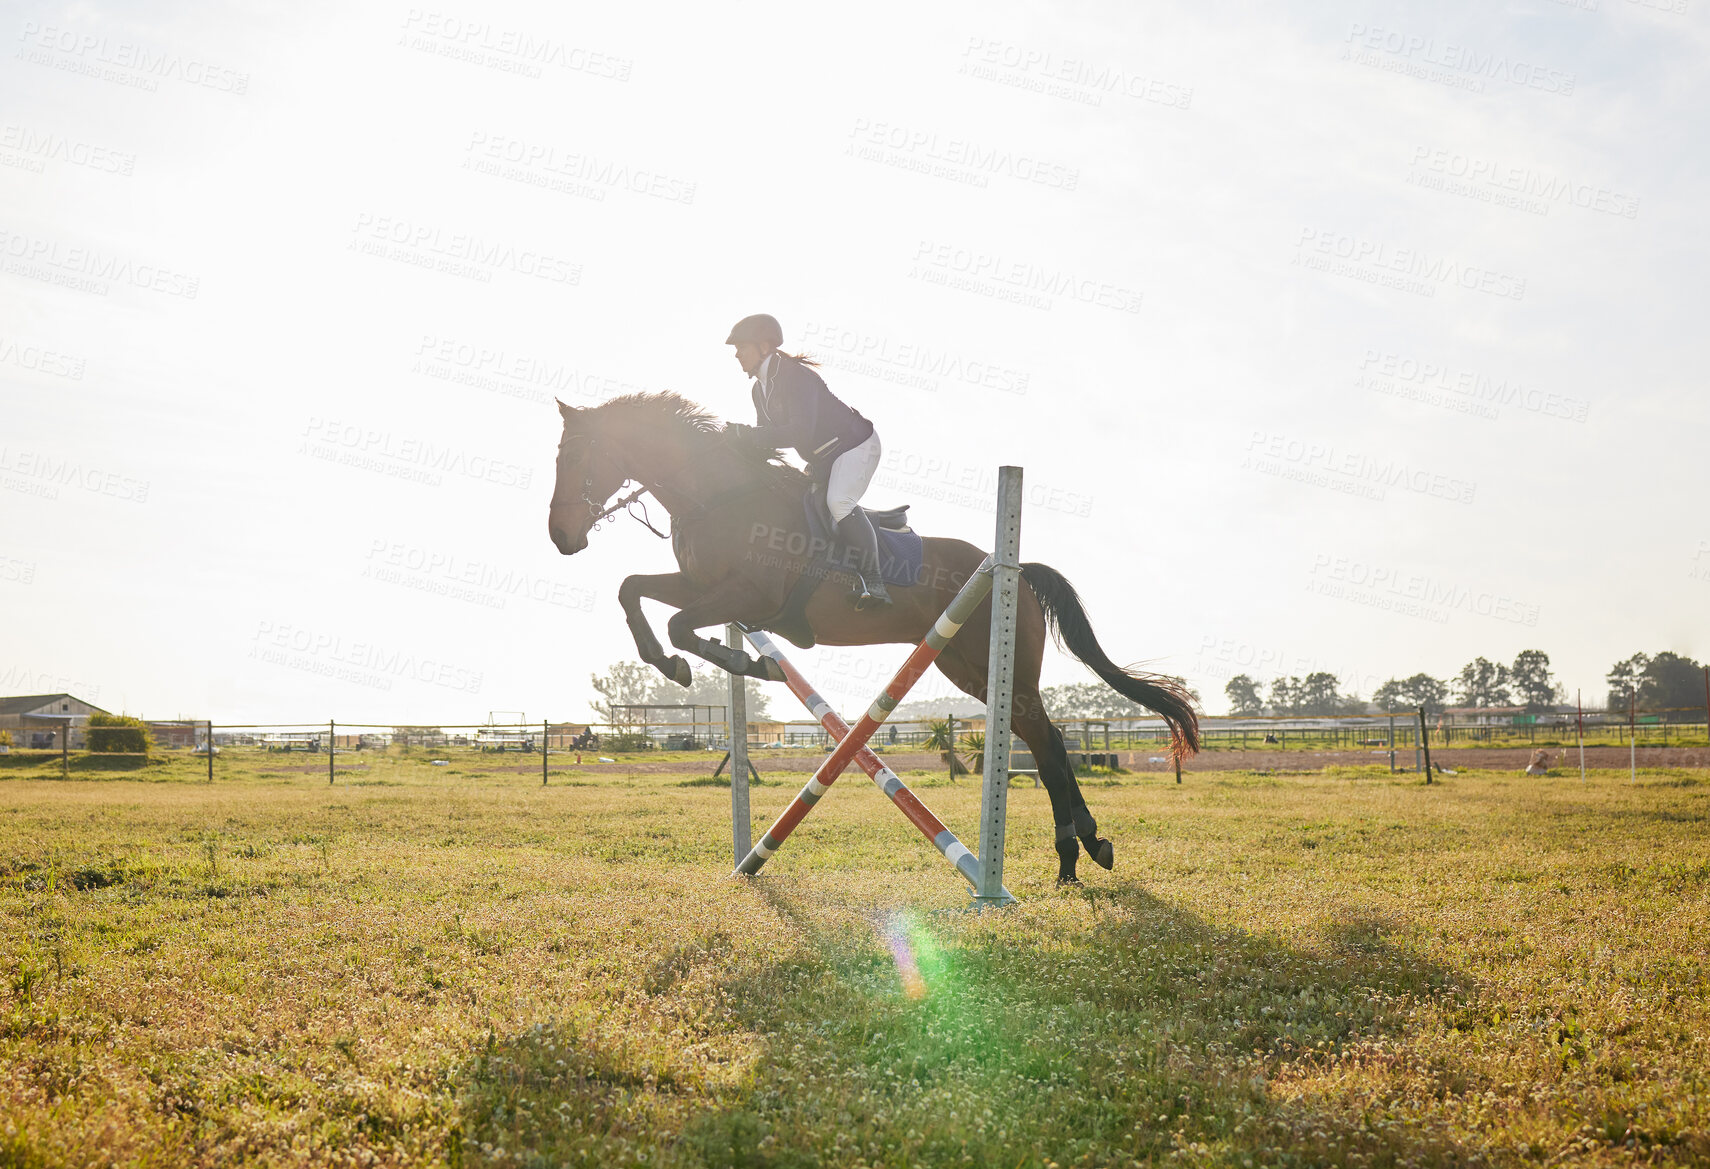 Buy stock photo Shot of a young rider jumping over a hurdle on her horse